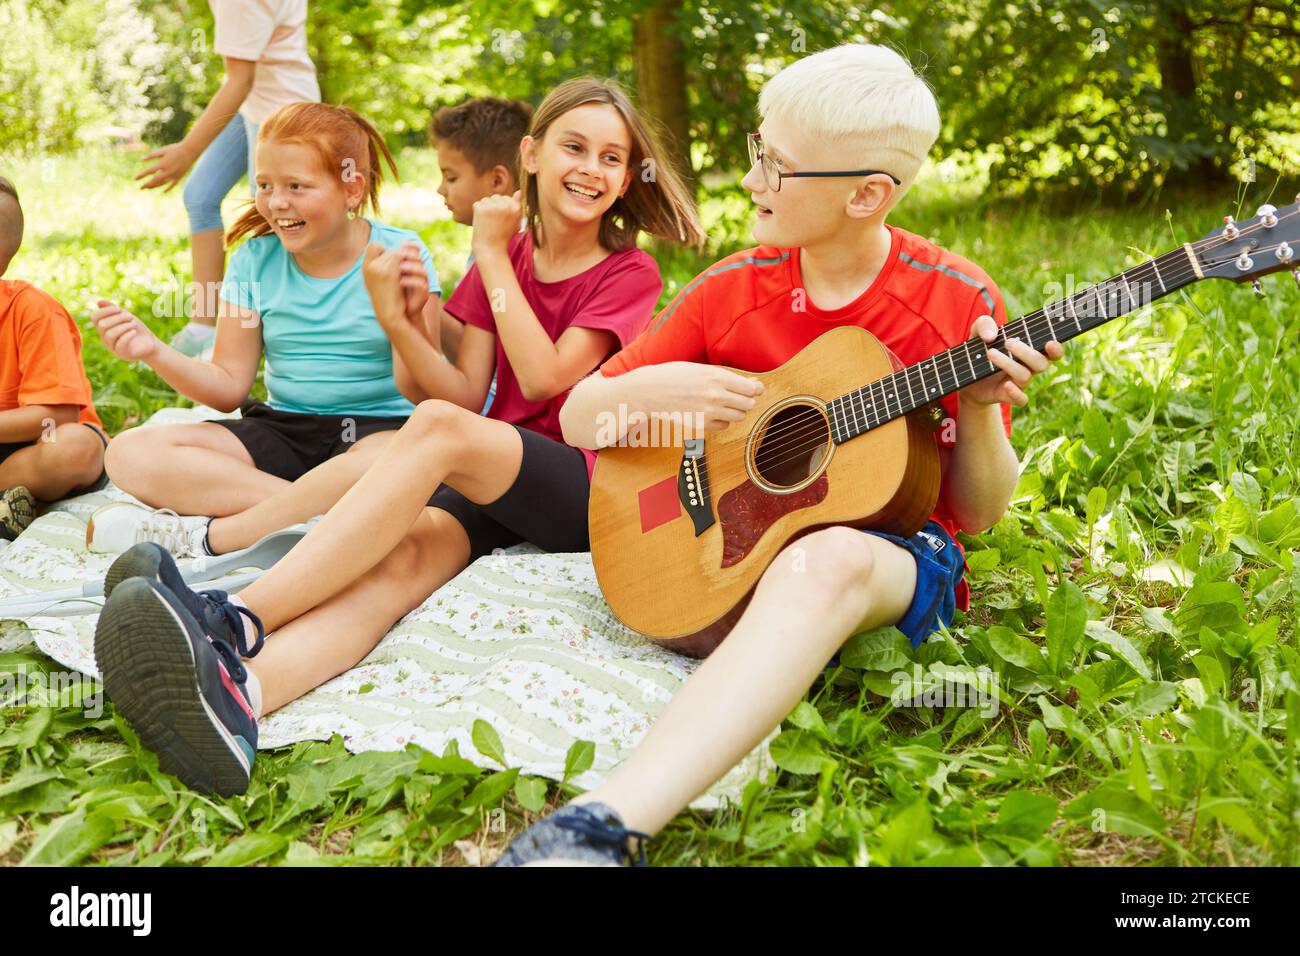 Disabled boy playing guitar while sitting down with friends on blanket during picnic at park Stock Photo